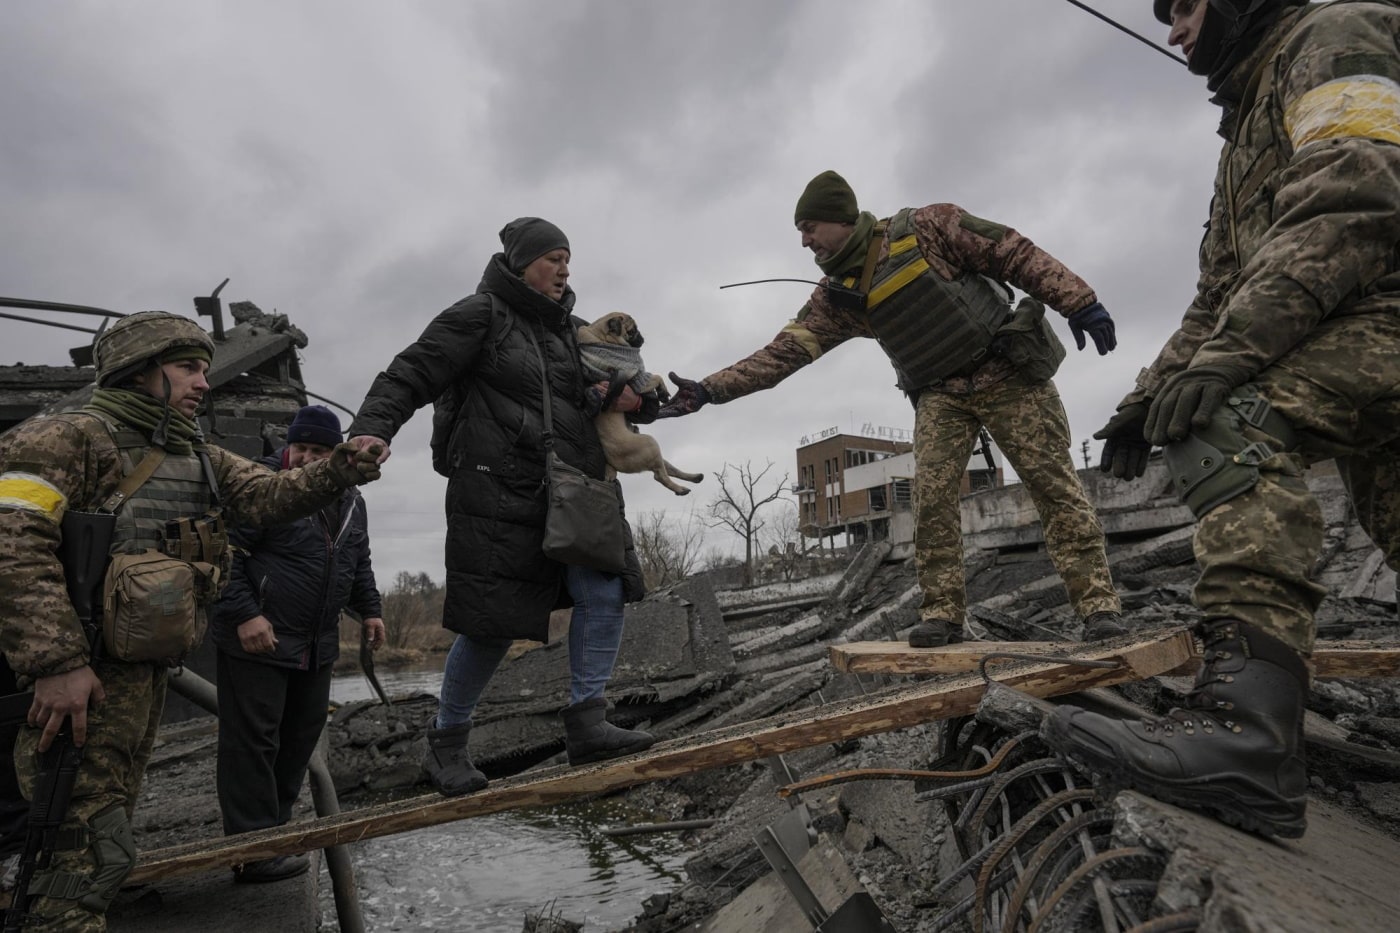 Ukrainian servicemen help a woman carrying a small dog across the Irpin River on an improvised path while assisting people fleeing the town of Irpin, Ukraine, Saturday, March 5, 2022. (AP Photo - Vadim Ghir